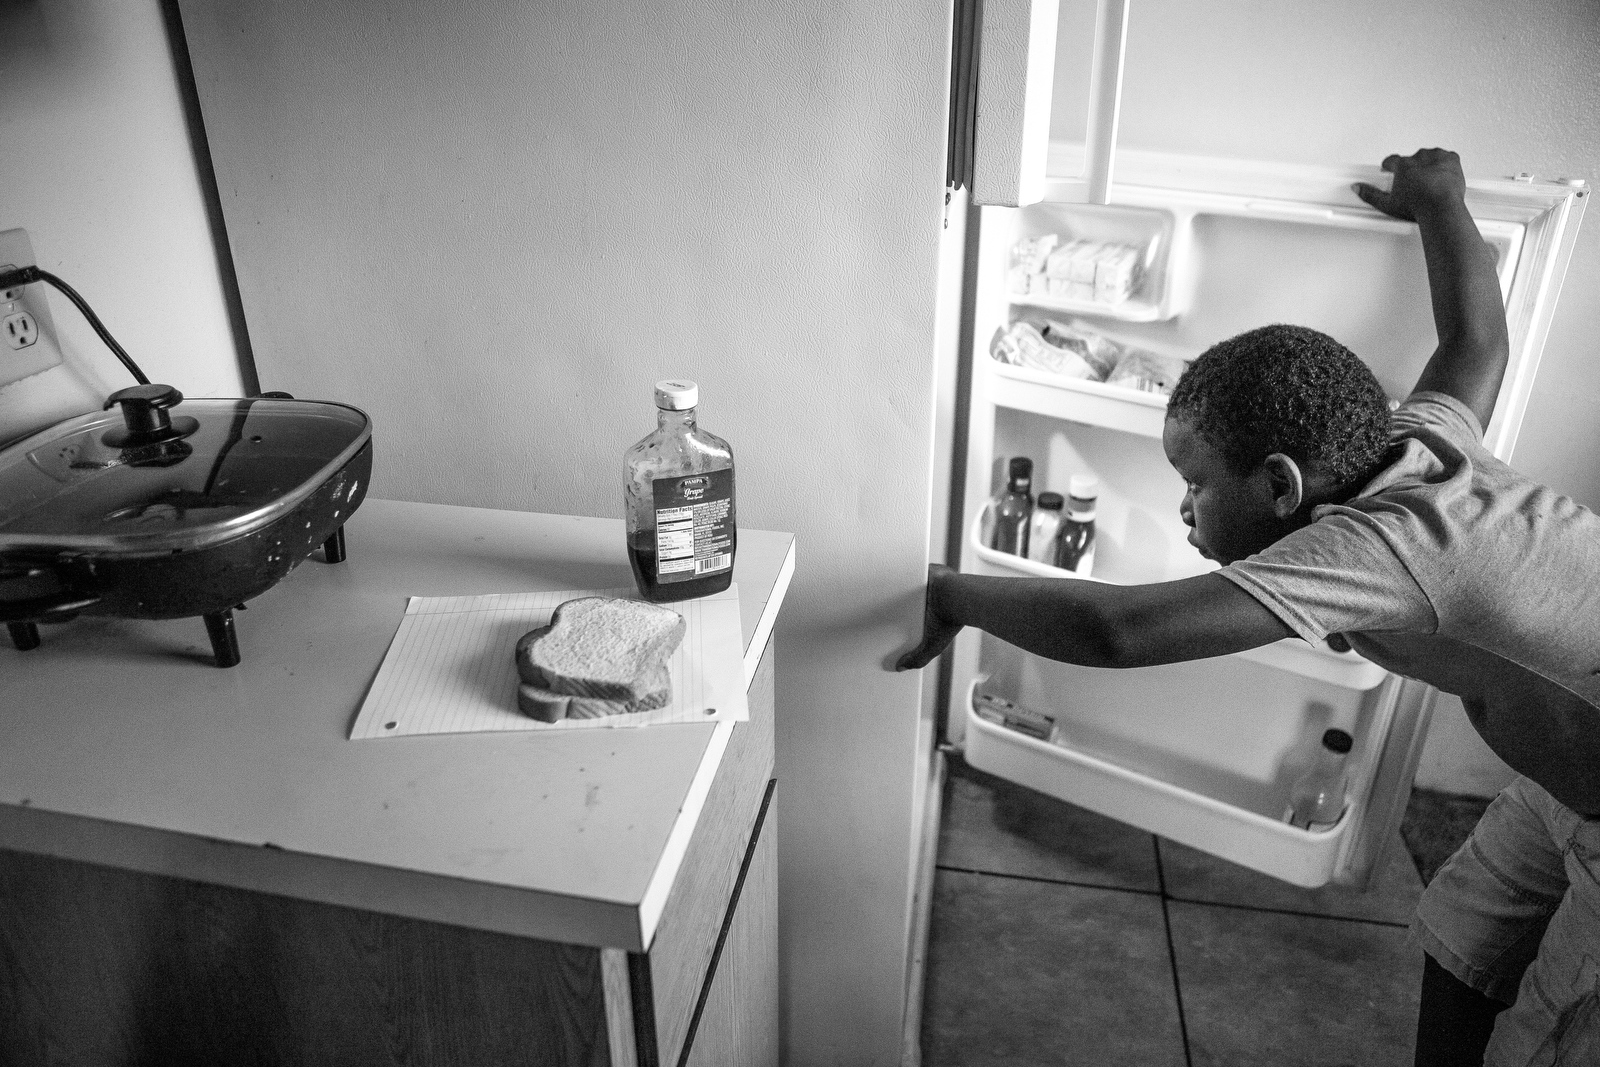  Donald Gibson, 8, checks the refrigerator before making a peanut butter and jelly sandwich at the home where he lives with his grandparents. Their previous home burned down and now Donald's grandmother Imogene only has one electric skillet to cook m